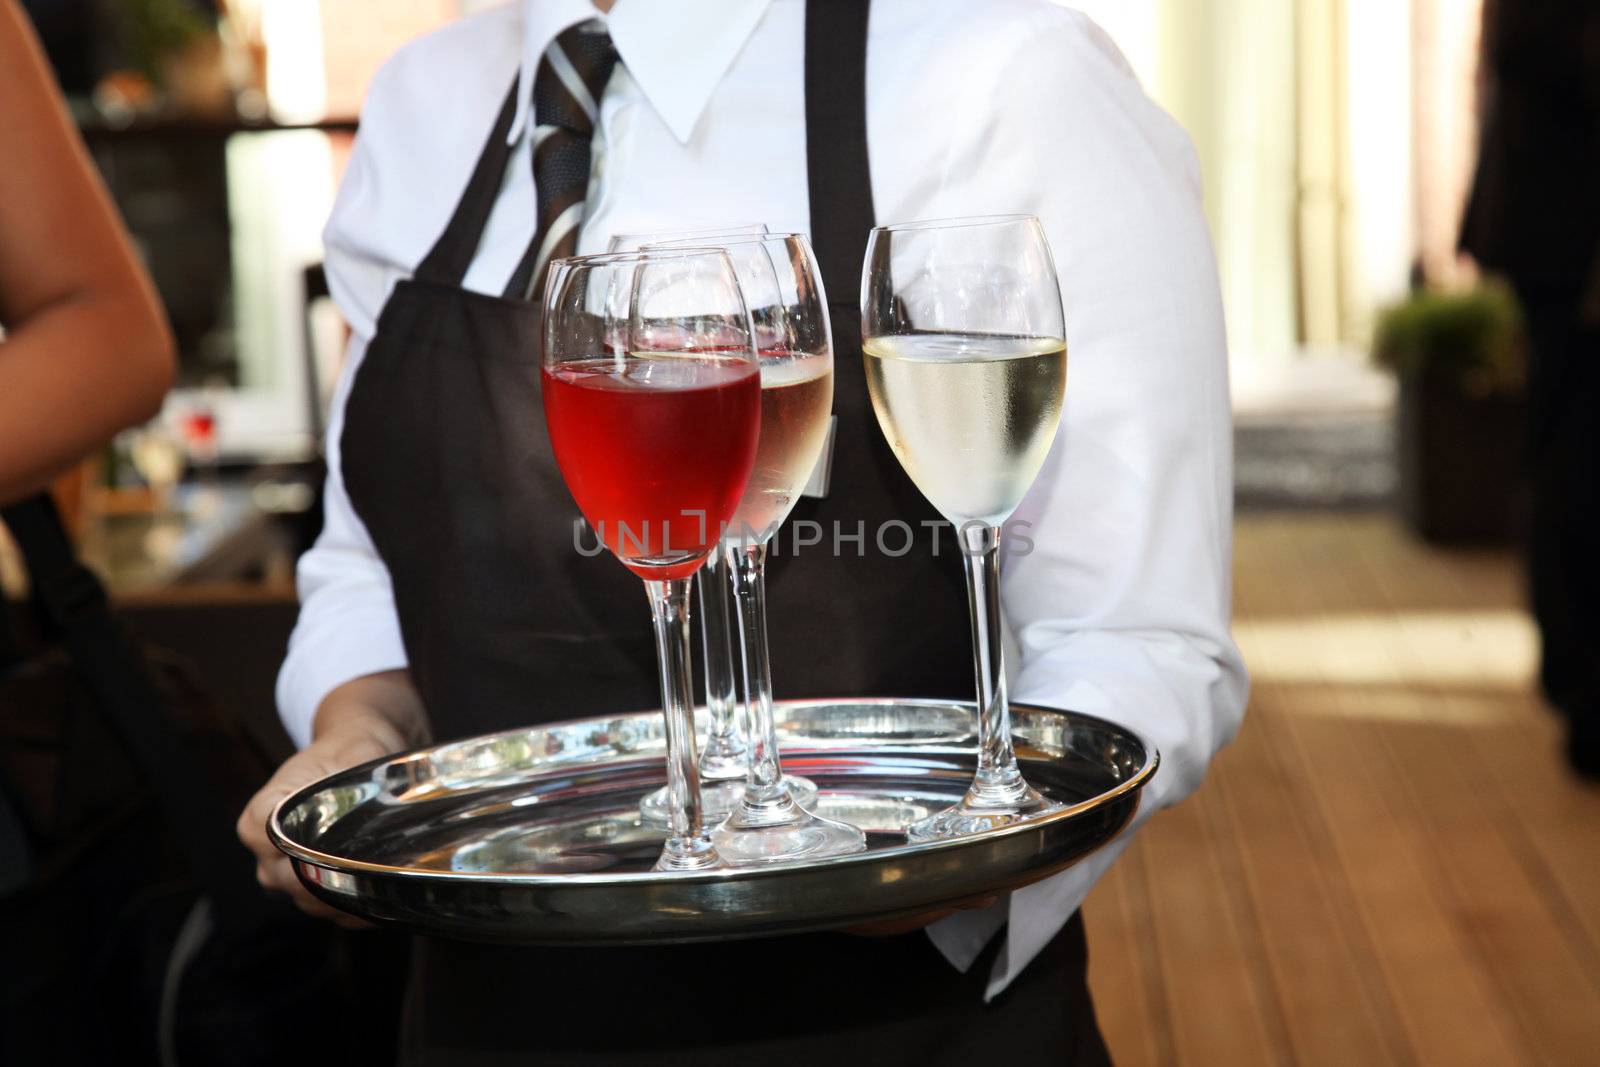 Waiter carrying wine glasses  by Farina6000